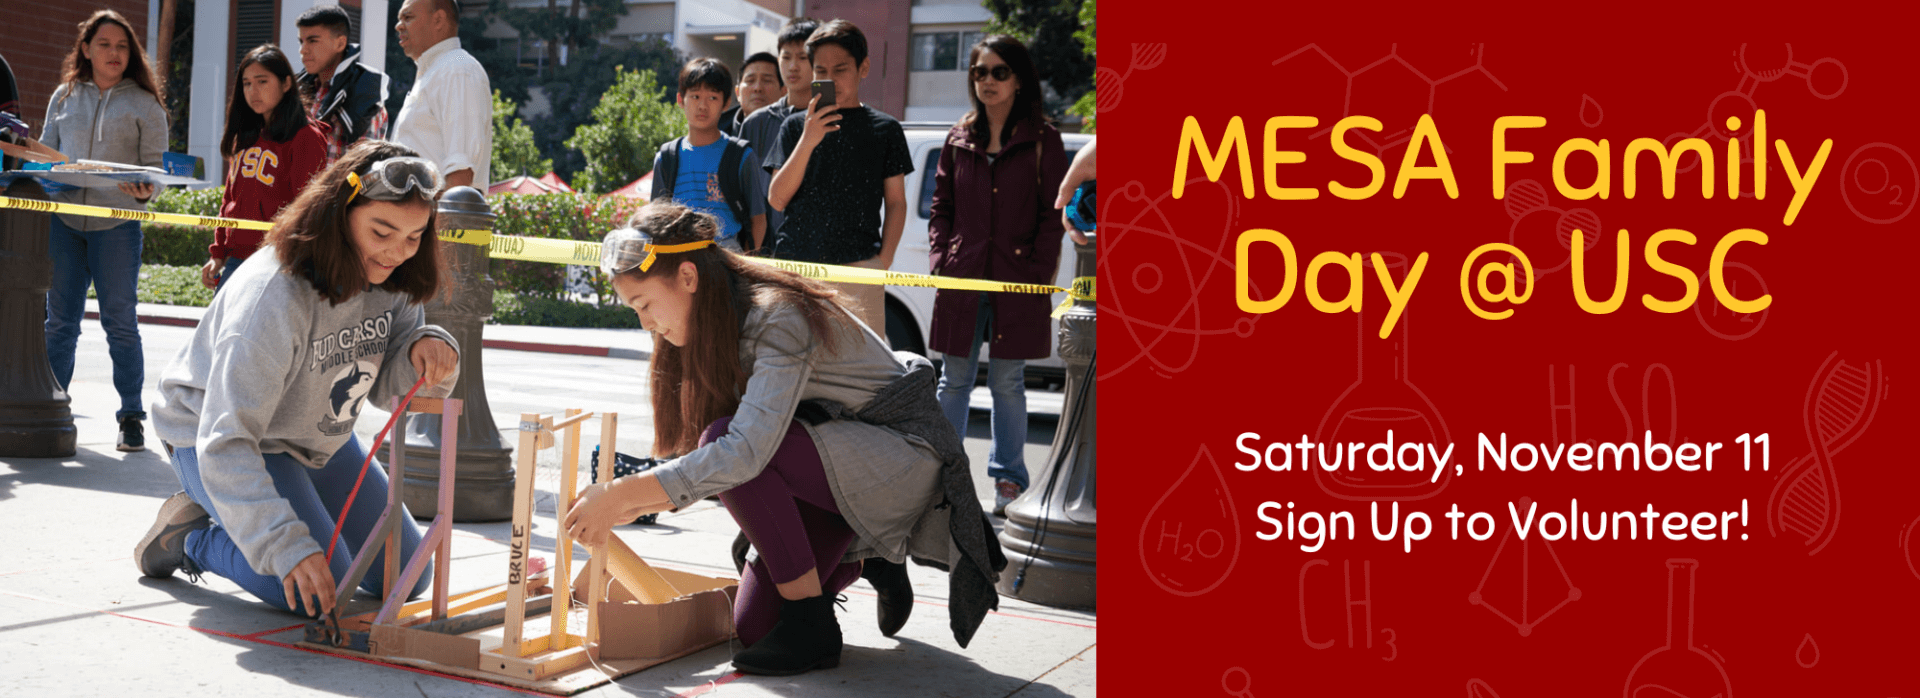 Featured image for “Volunteer for MESA Family Day @ USC – Saturday, November 11”